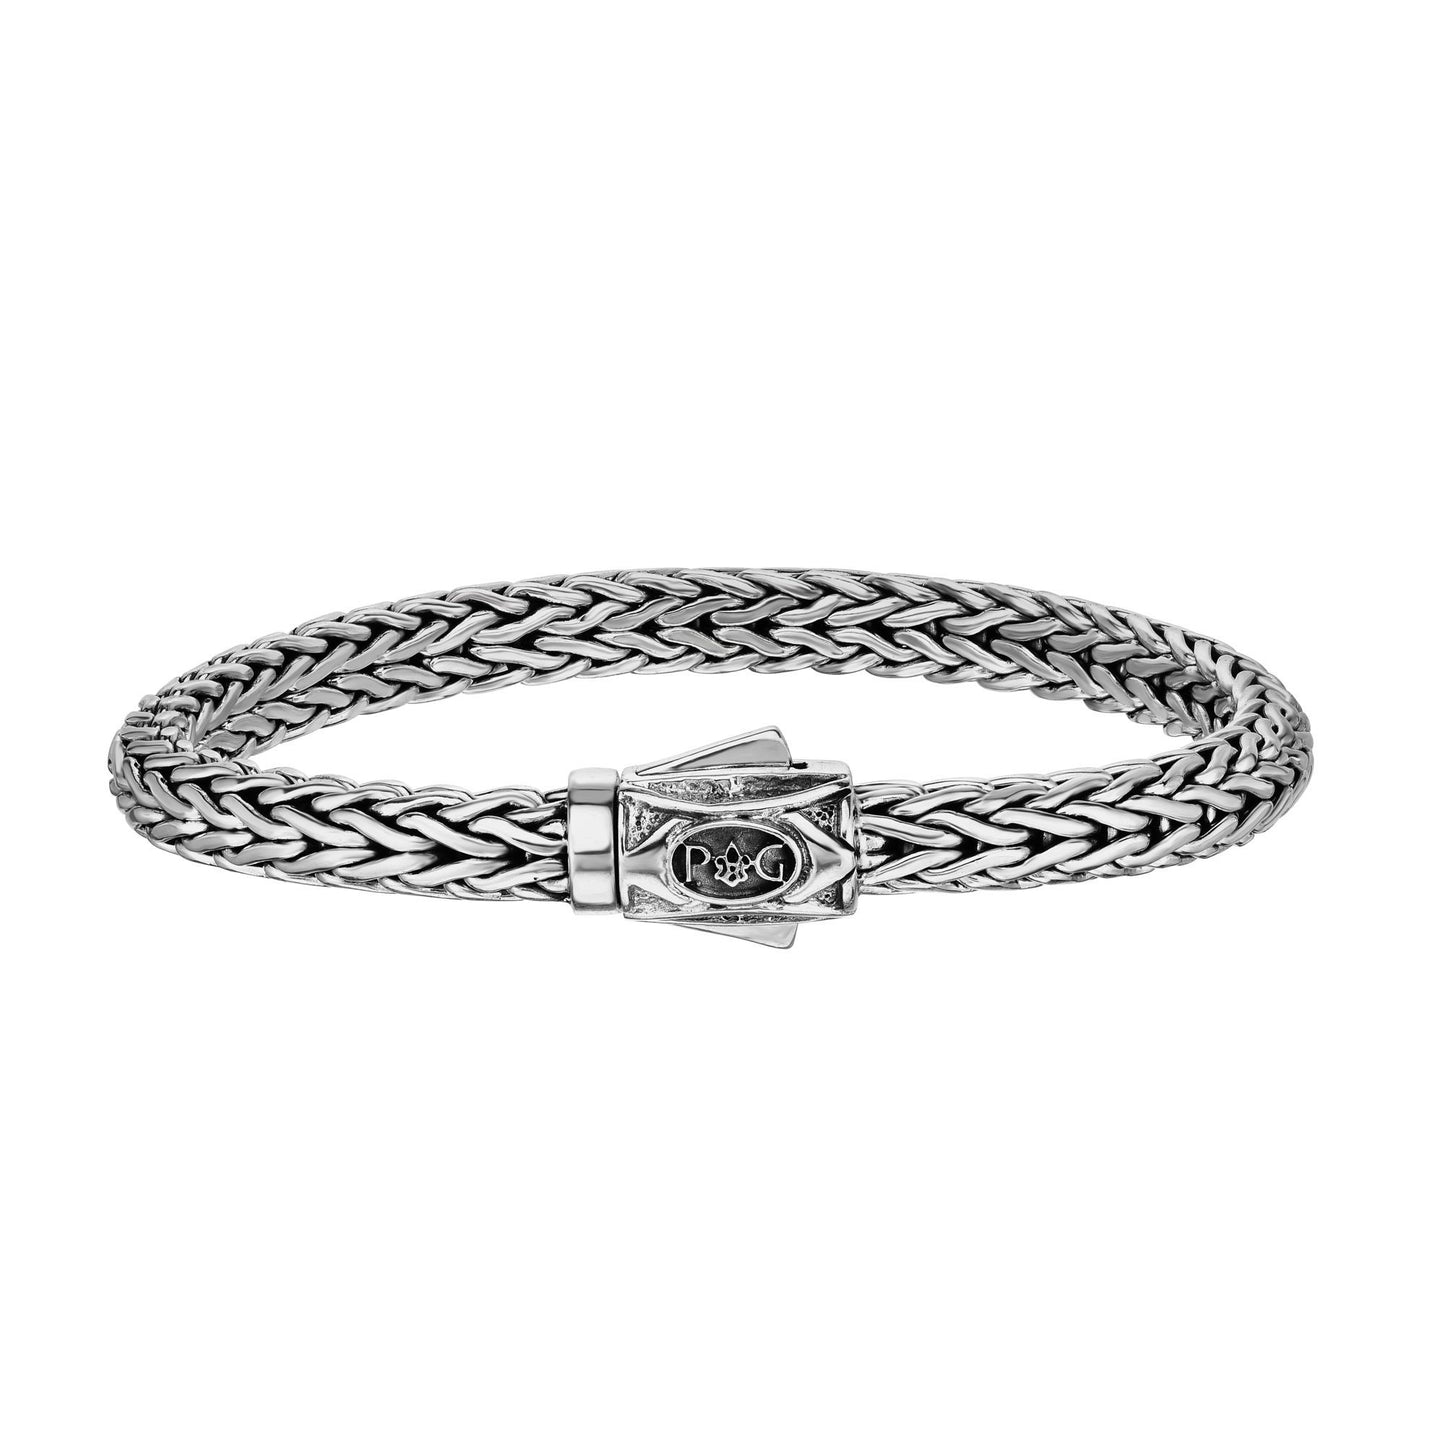 Sterling Silver with Dome Woven Bracelet with Box Clasp